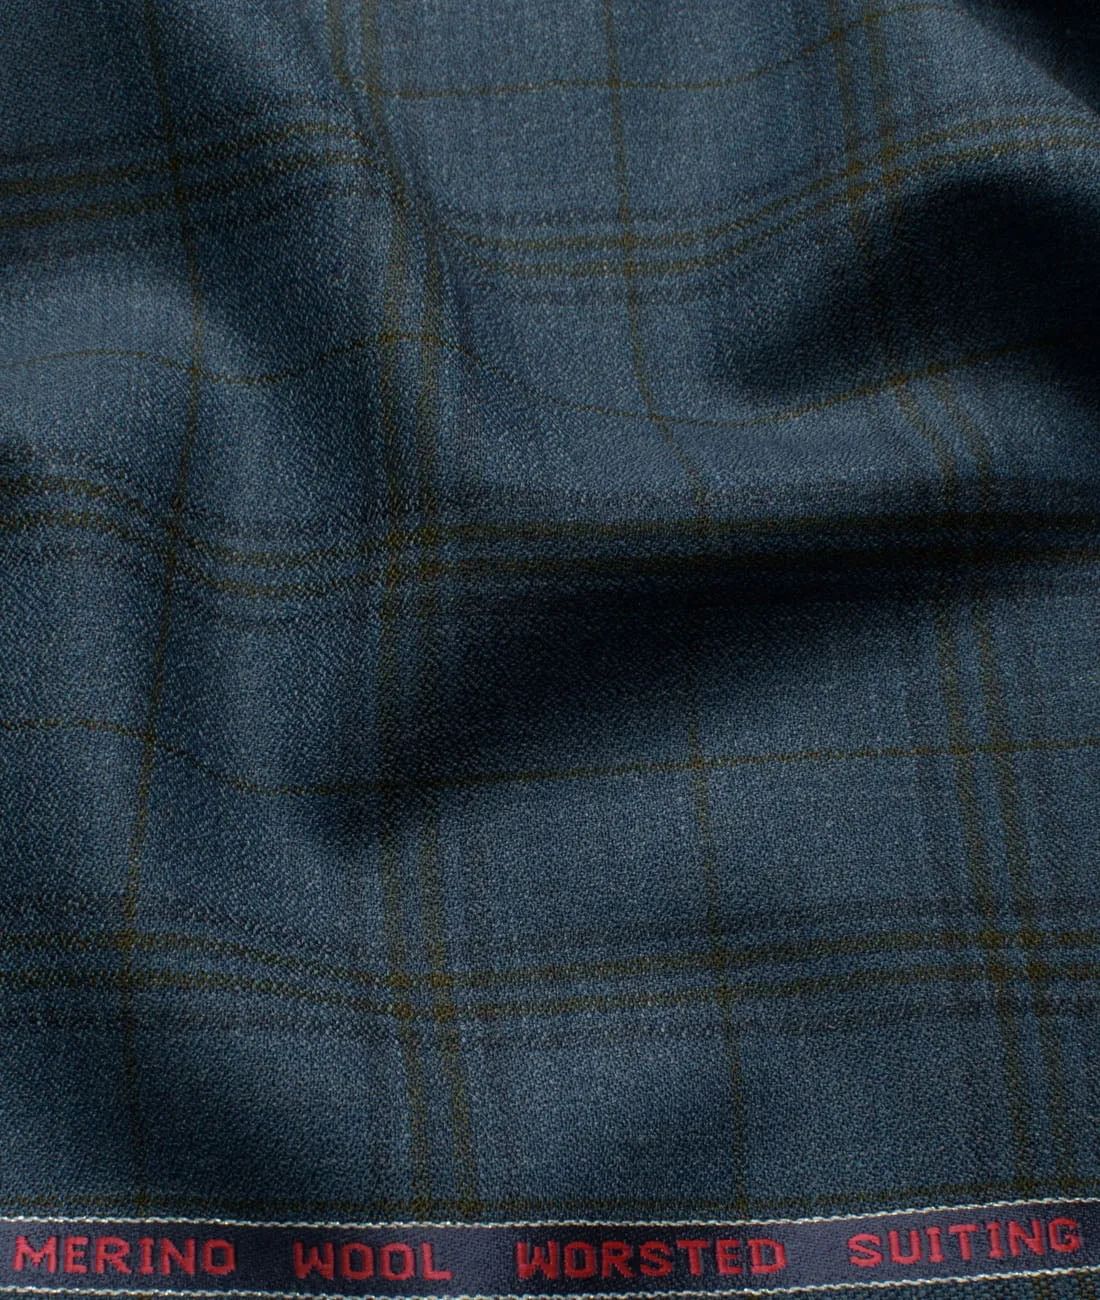 Wool Checks Super 100GÇÖs Unstitched Suiting Fabric (Blue) Blue Crepe Weave base with Sea Green & Dark Blue Checks